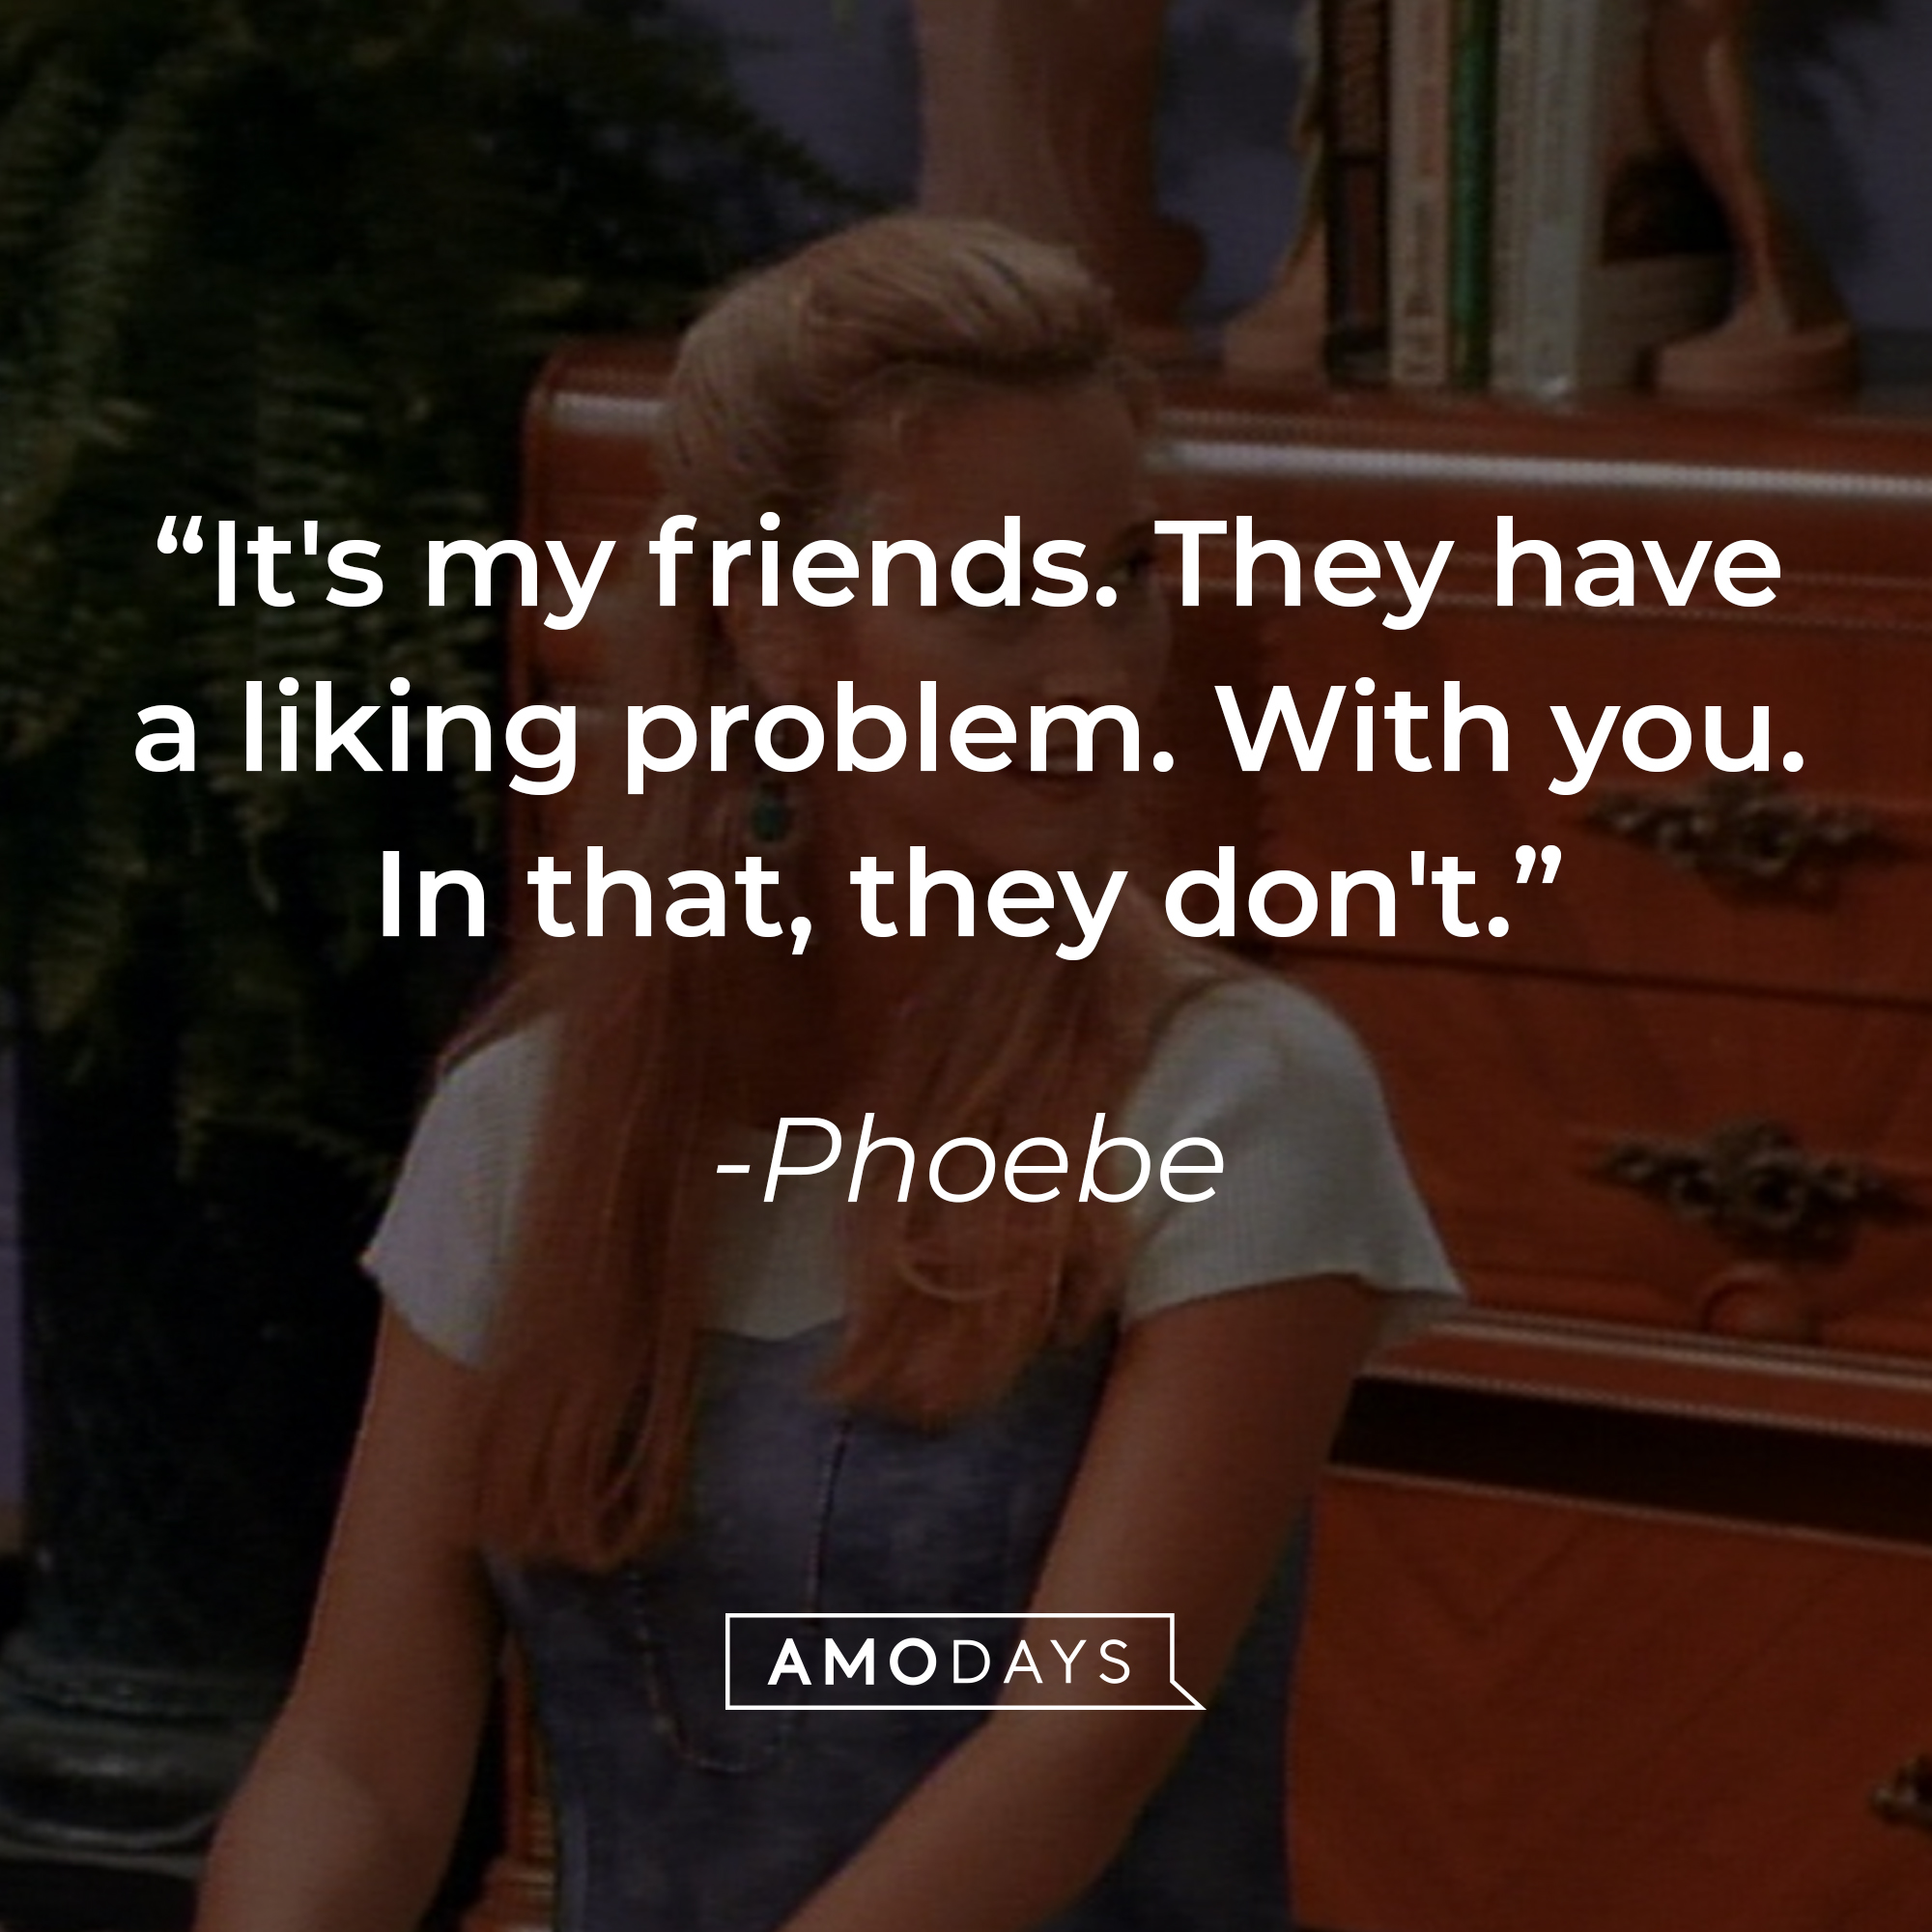 Phoebe's quote: "It's my friends. They have a liking problem. With you. In that, they don't." | Source: Facebook.com/friends.tv